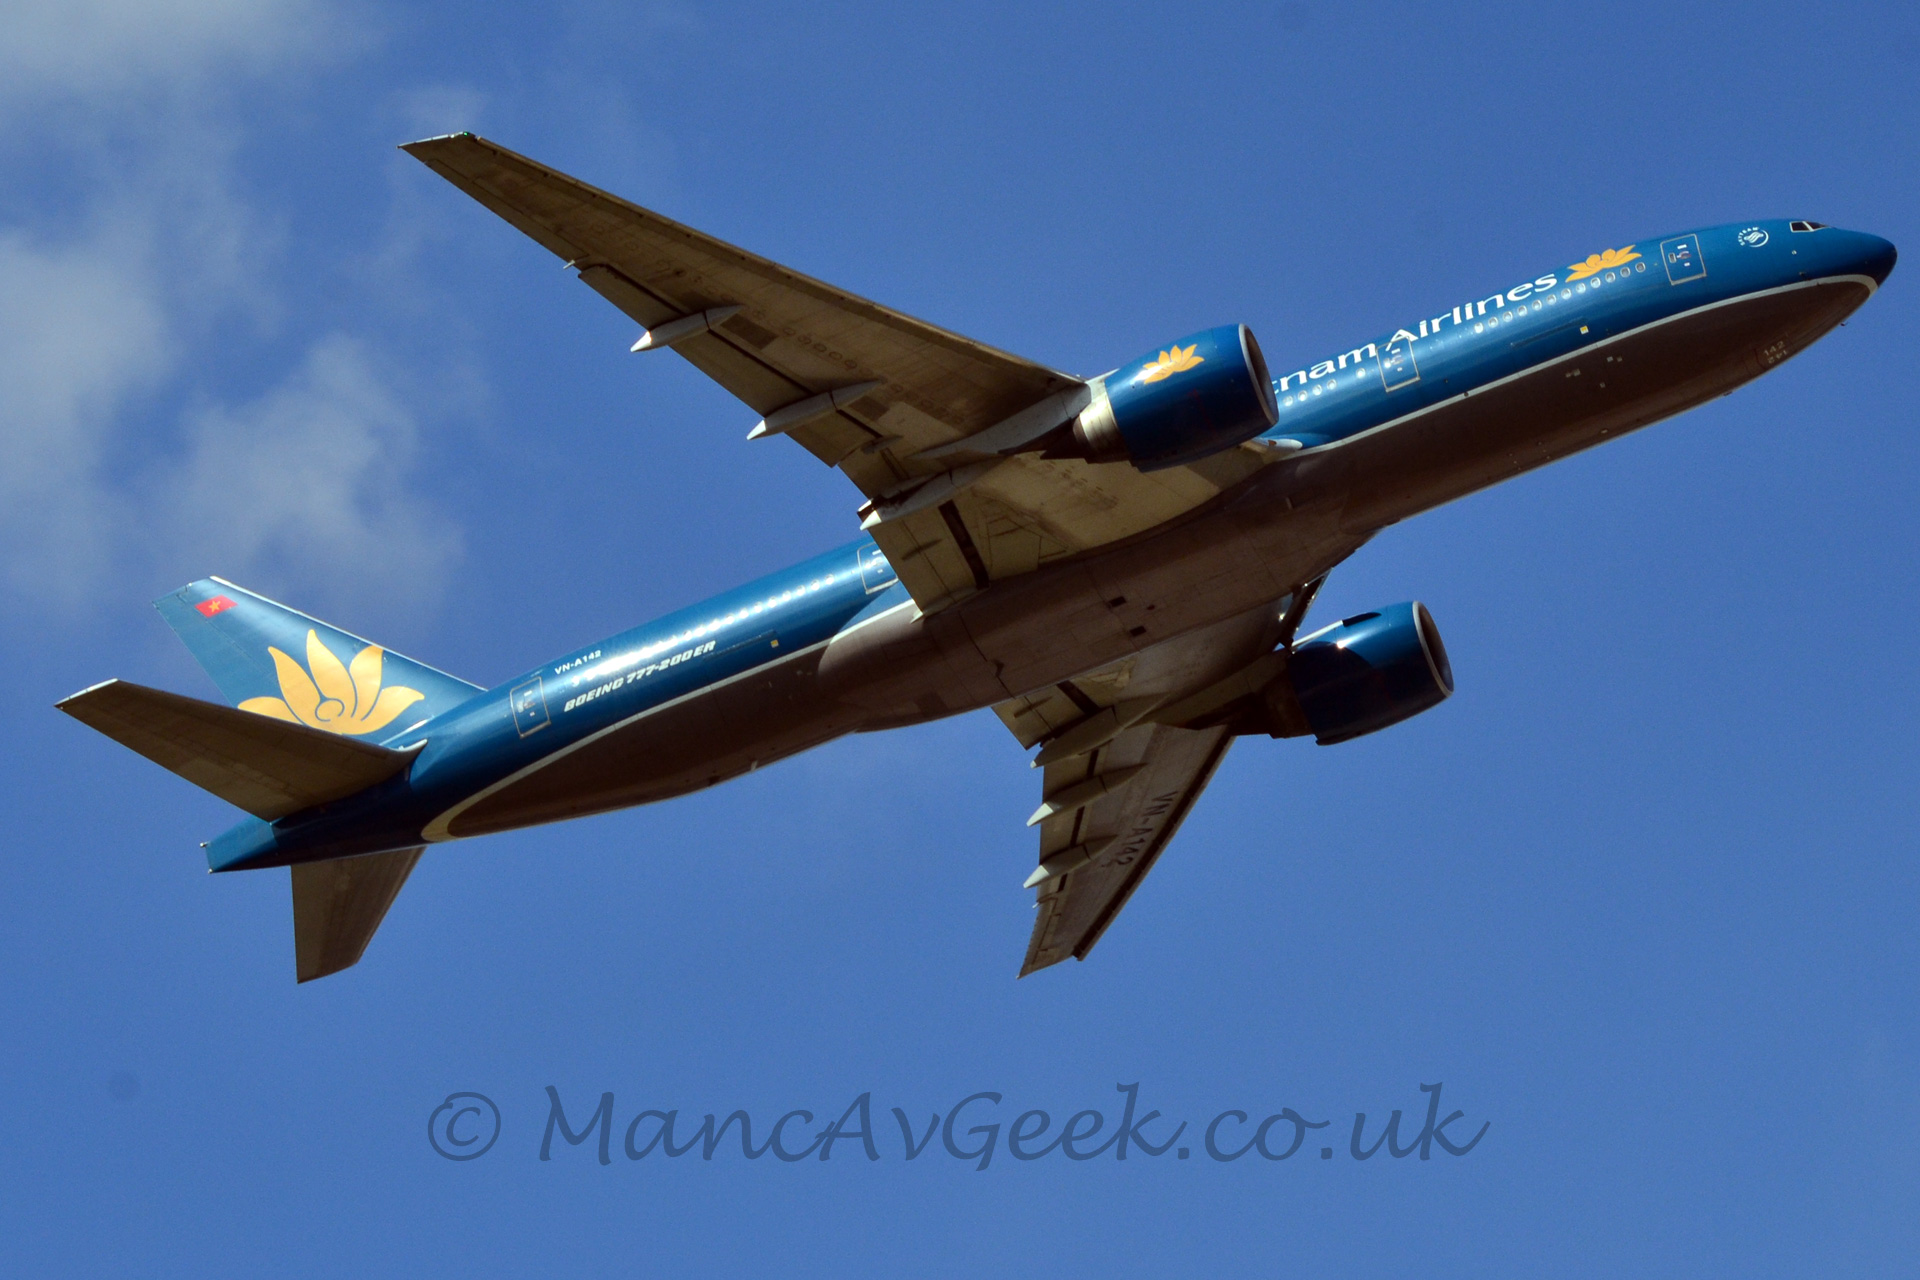 Low side view of a twin engined jet airliner flying from left to right at a low altitude with the flaps extended behind the wings and nose raised quite sharply, suggesting it has just taken off. The plane is mostly dark blue with a dark grey belly, and white "Vietnam Airlines" titles on the upper forward fuselage, partially obscured by the engine. A large golden flower adorns the upper forward fuselage, the tail, and the engine pods. The registration "VN-A142" is visible in white on the upper rear fuselage, and in black under the left wing. Behind the plane, the sky is an intense blue, with wisps of cloud in the top left corner.